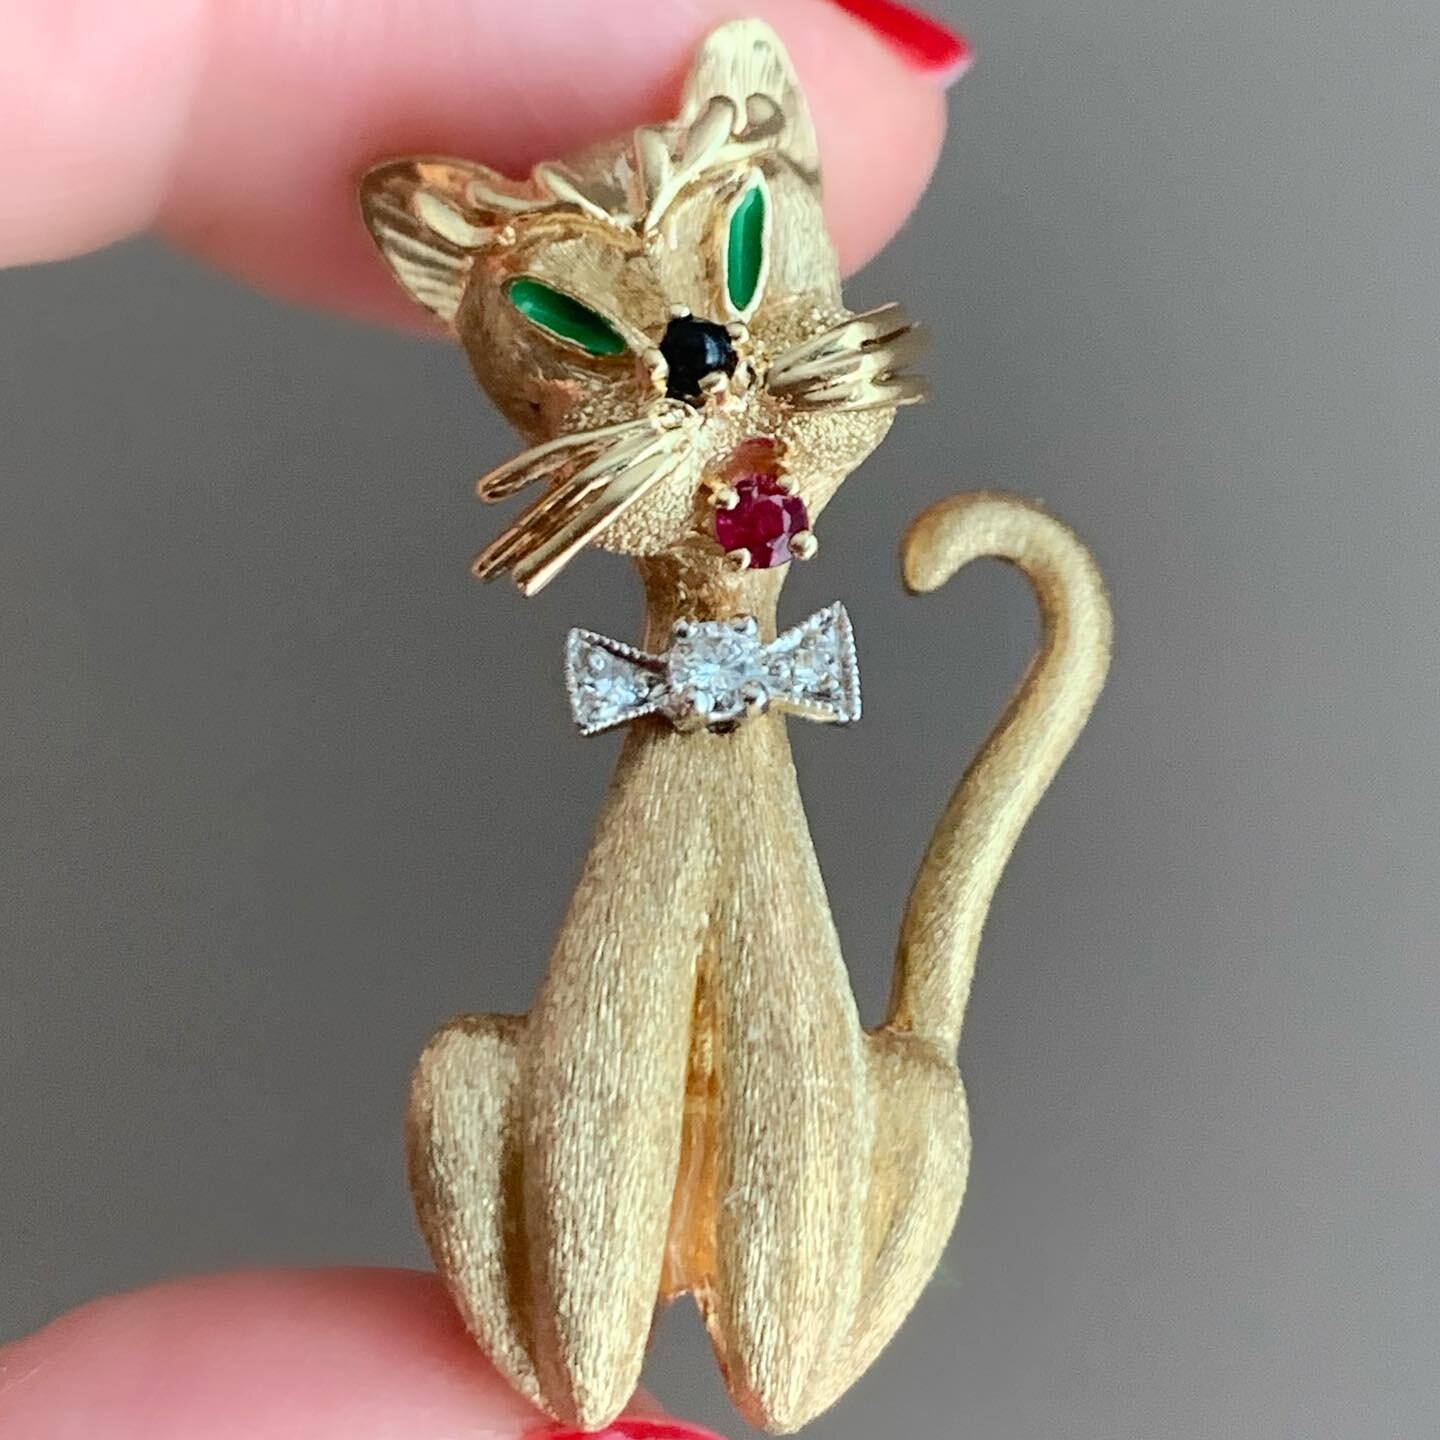 Estate 14k Yellow Gold Cat Pin w/ Diamond Bow Tie 💎 0.10tdw

DM to inquire 

815-13470

catlover #cats #catjewelry #catjewelrylovers #14k #pins #catbrooch